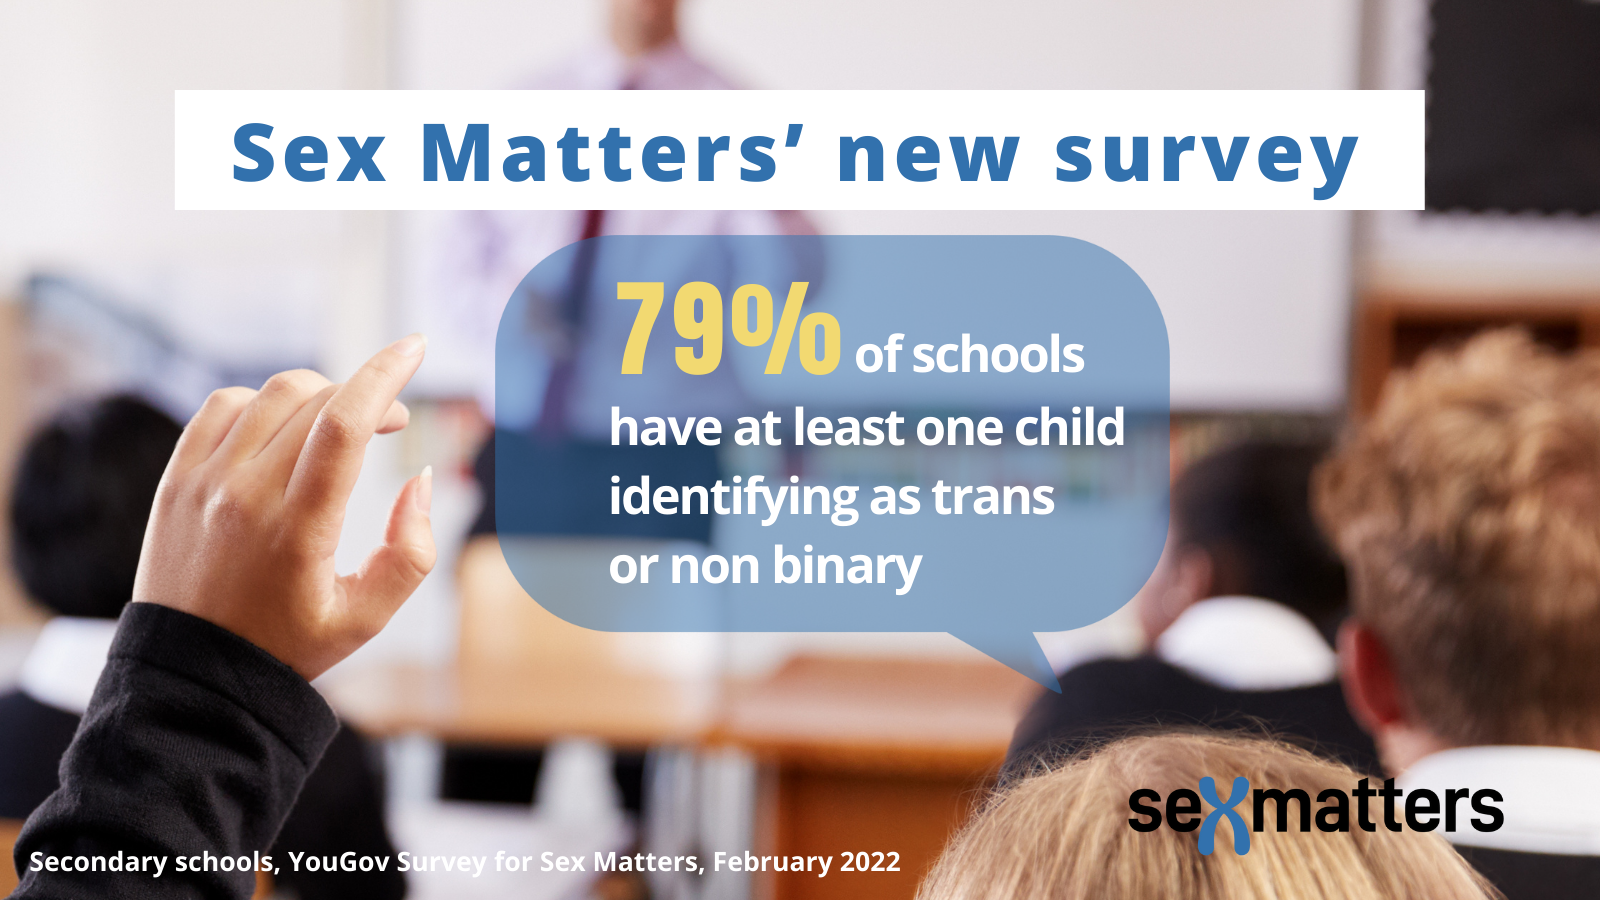 79% of schools have at least one child identifying as trans or non-binary